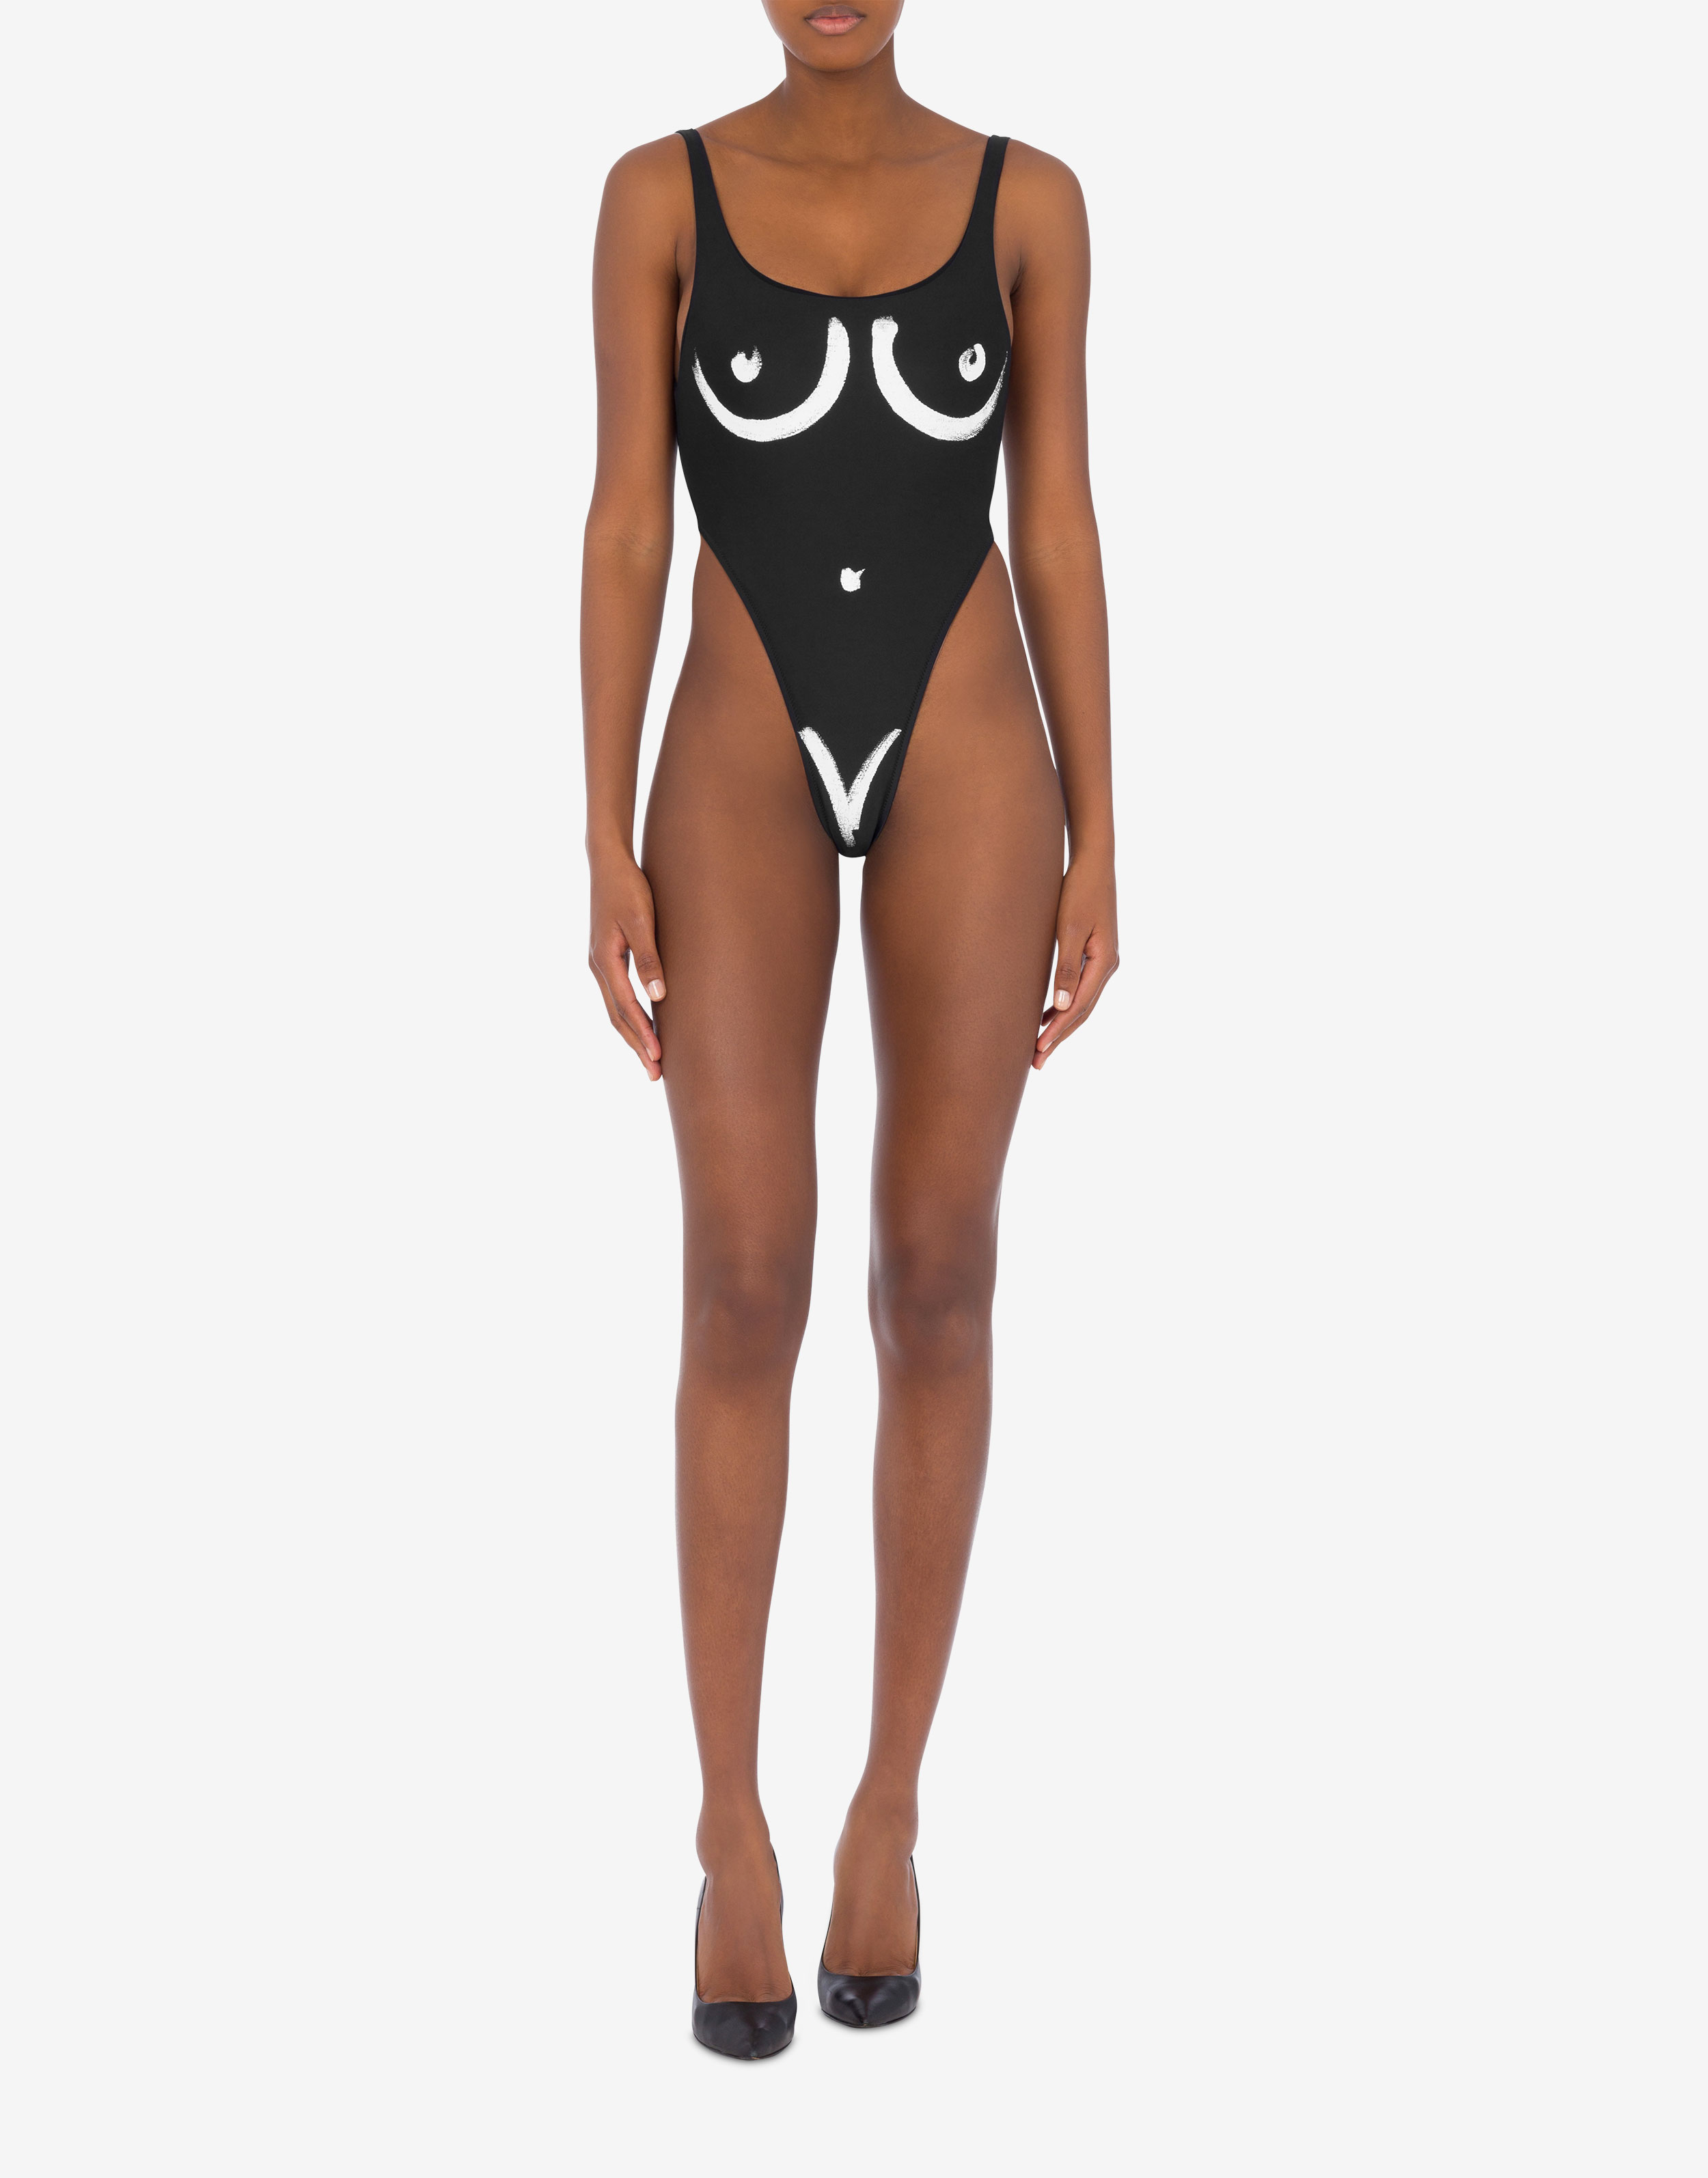 MOSCHINO TEEN One-piece Swimsuits Girl 9-16 years online on YOOX